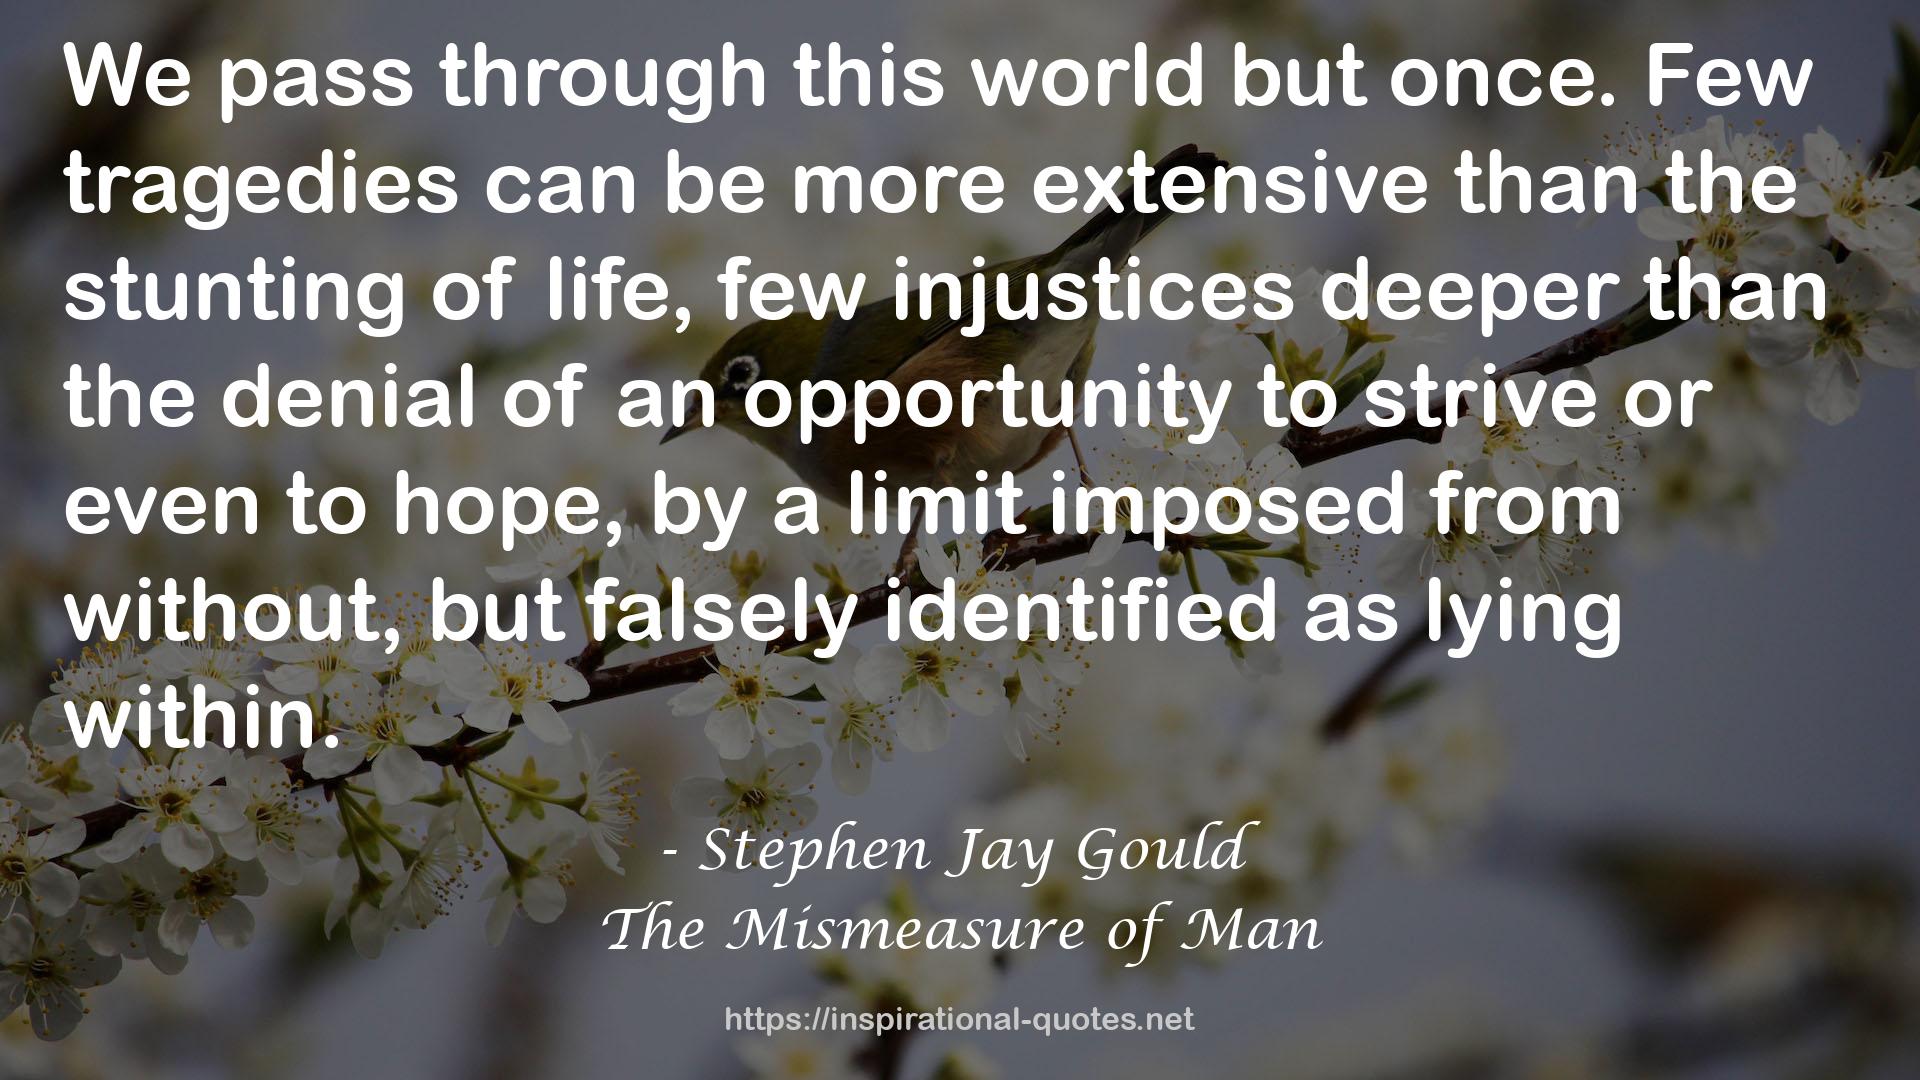 Stephen Jay Gould QUOTES